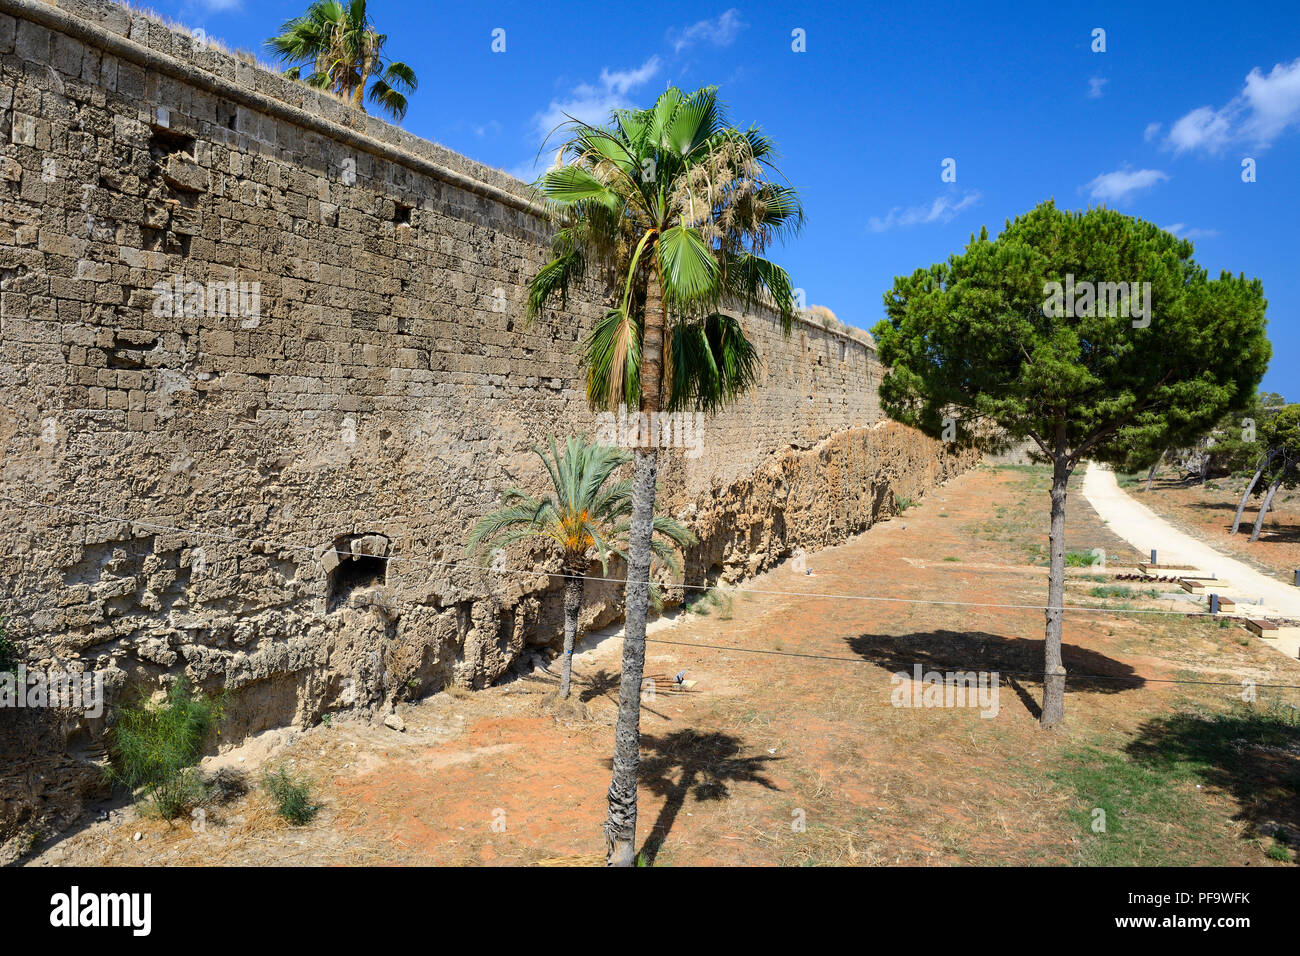 Venetian Walls surrounding the old city of Famagusta (Gazimagusa) in the Turkish Republic of Northern Cyprus Stock Photo